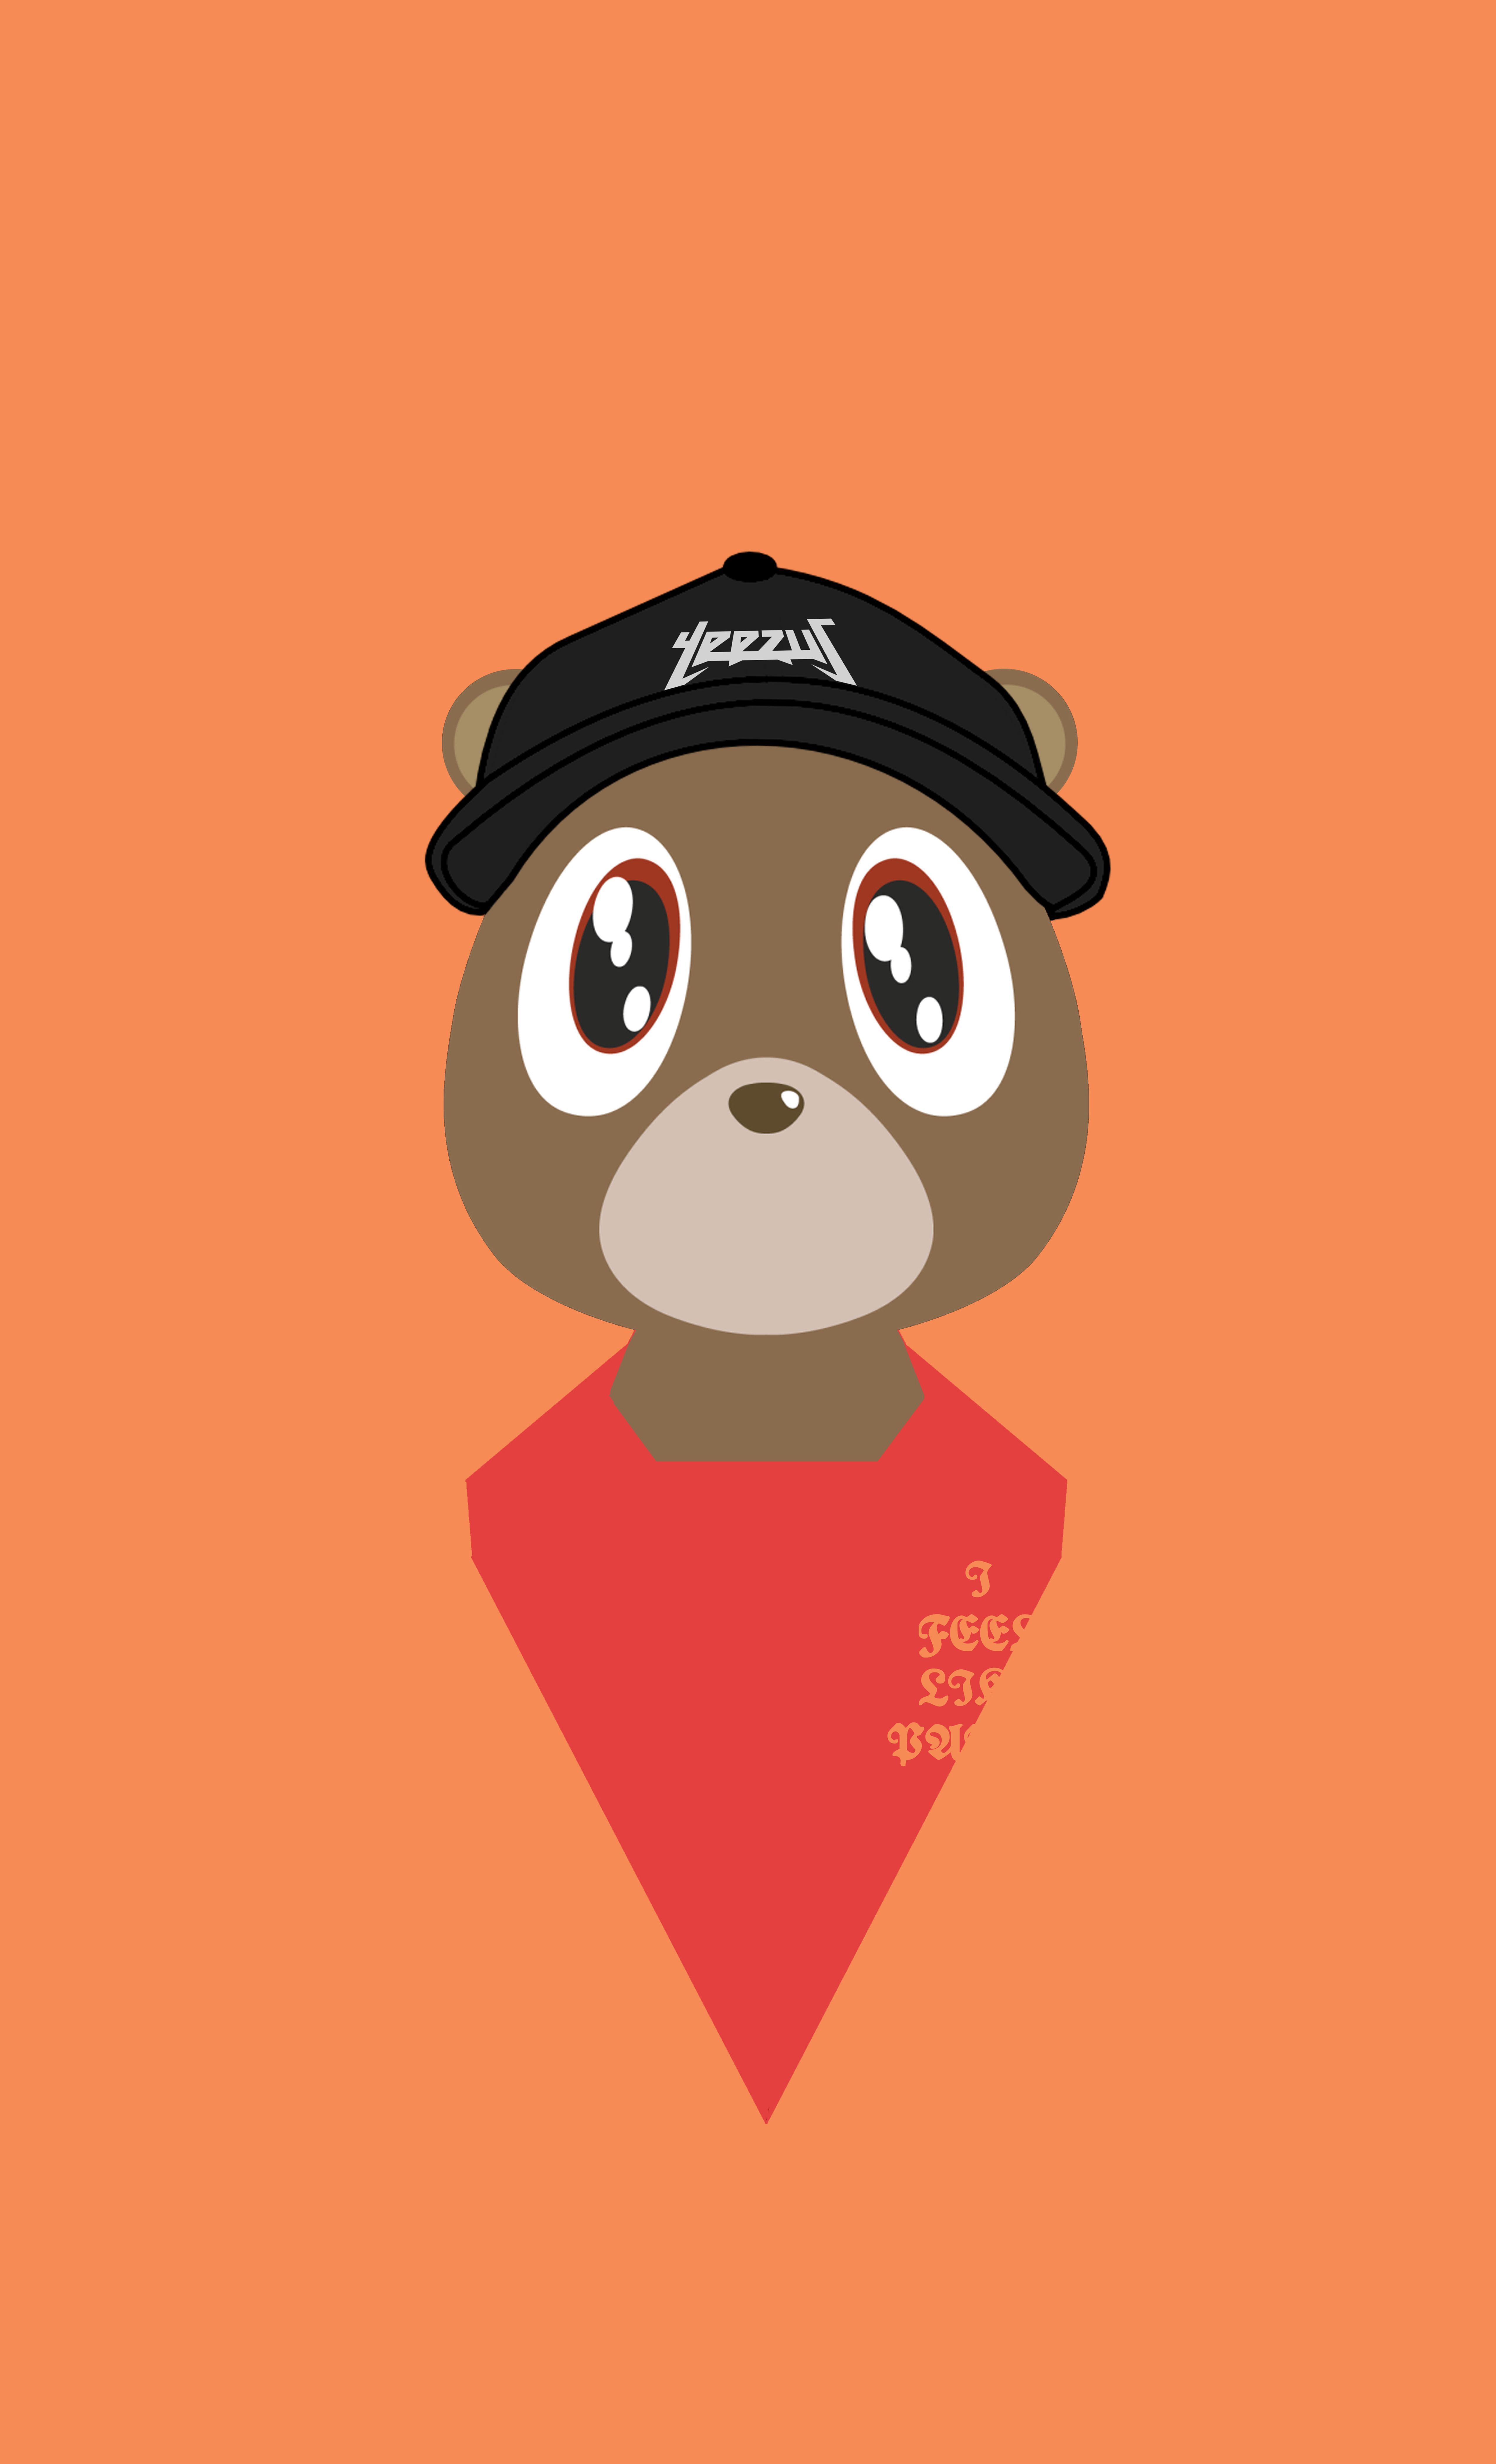 15 Kanye West Wallpapers  Backgrounds for Your iPhone  Gridfiti